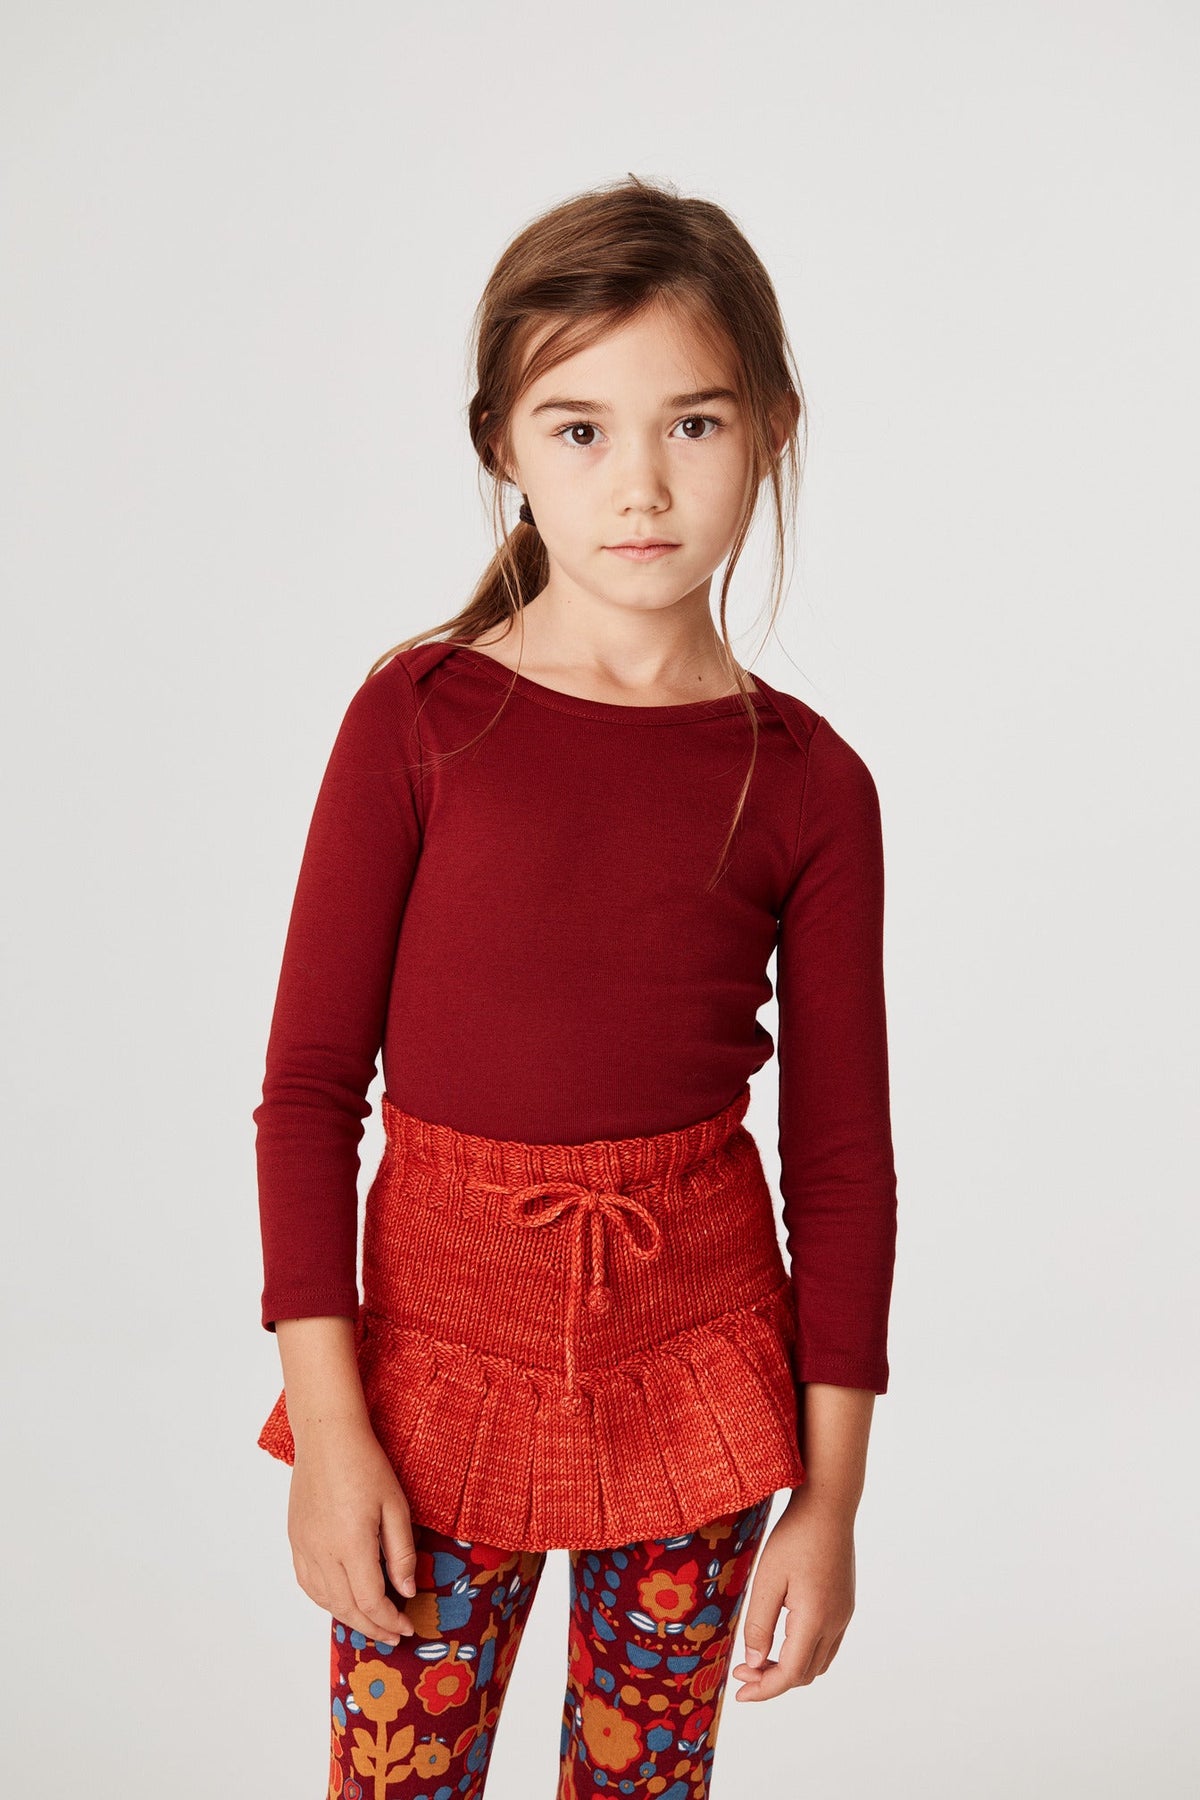 Long Sleeve Lap Tee - Cranberry+Model is 48 inches tall, 44lbs, wearing a size 4-5y